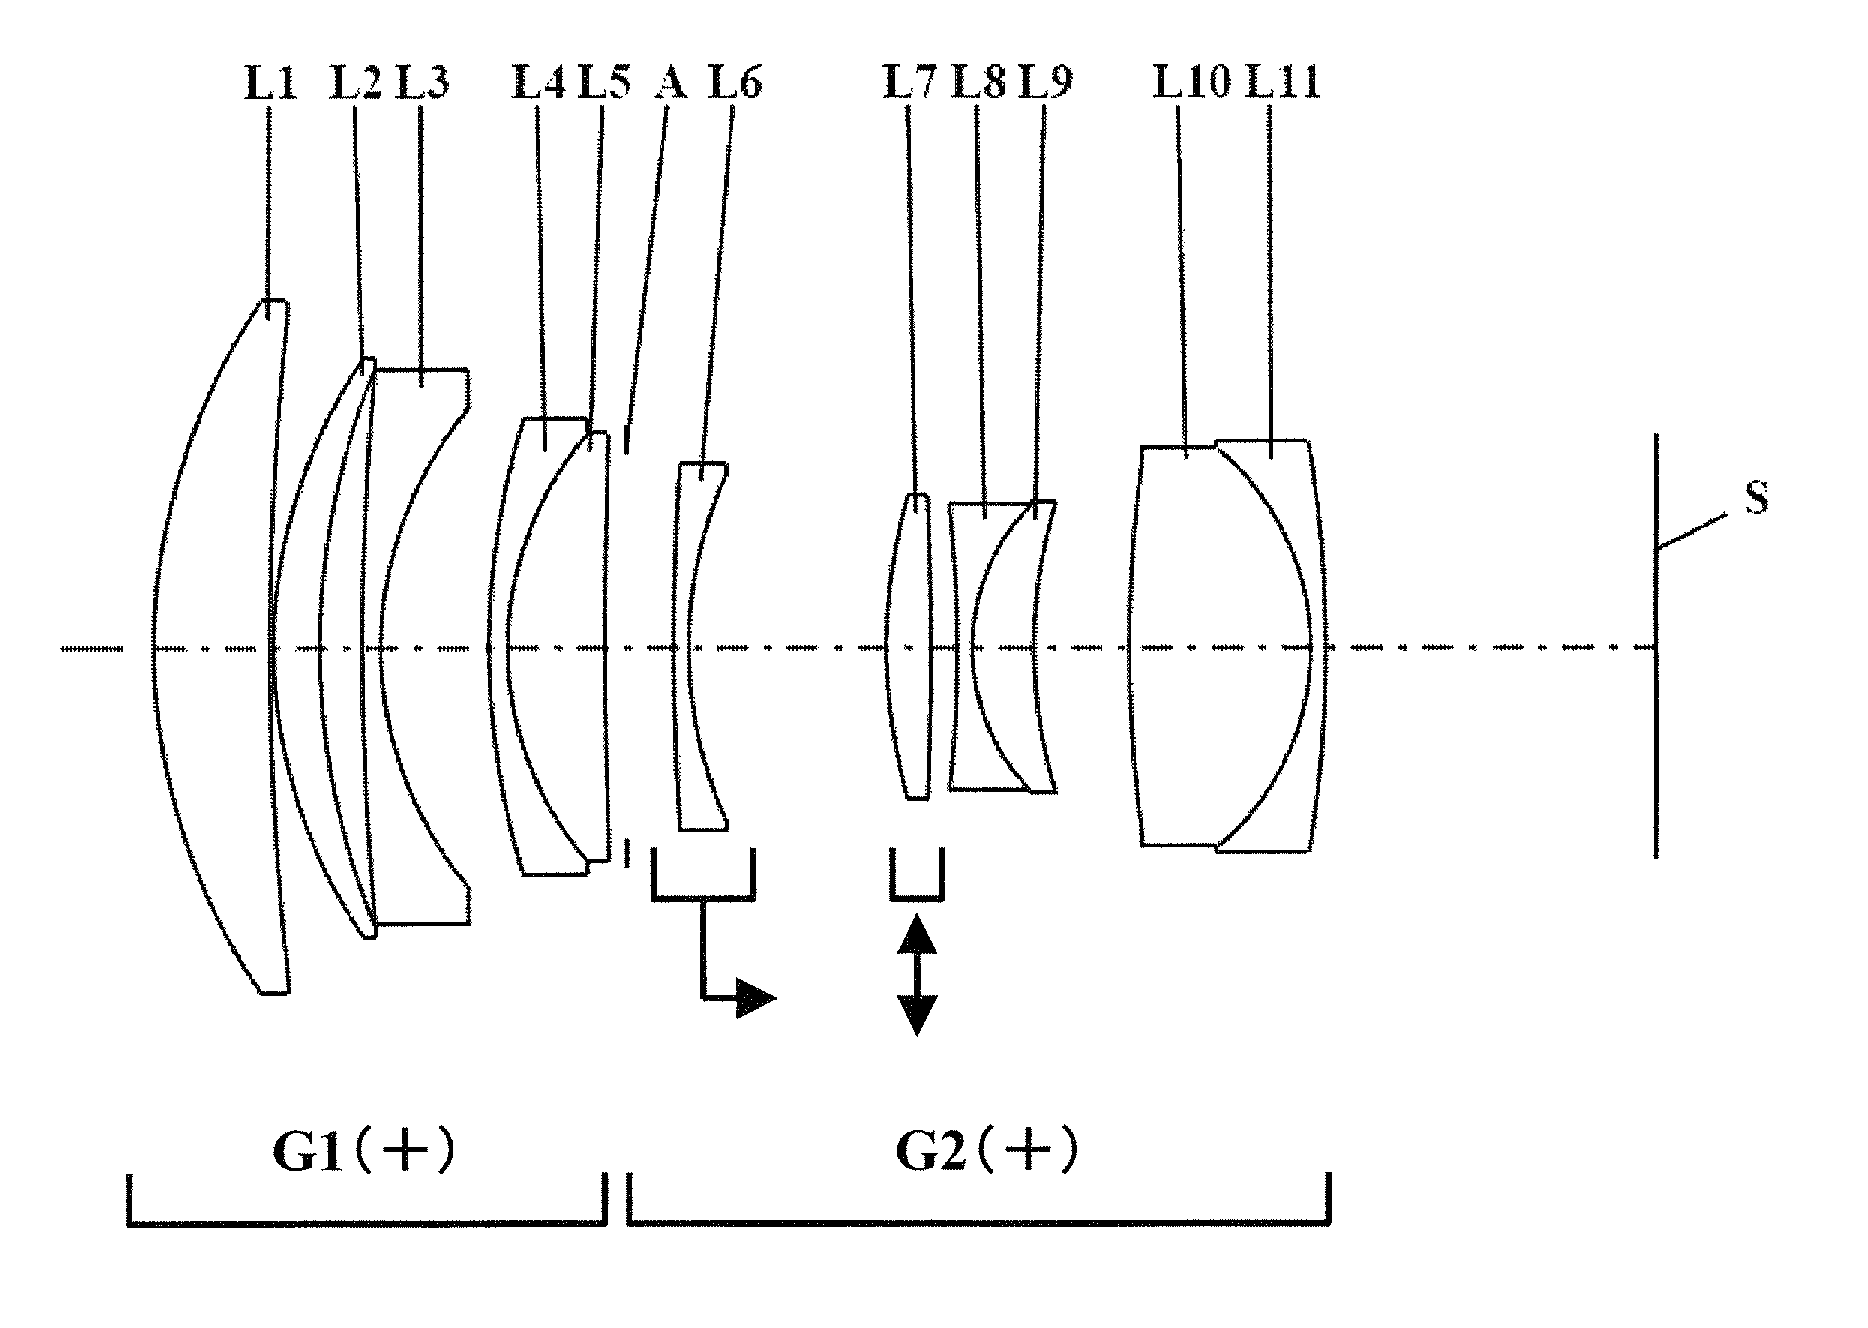 Inner focus lens, interchangeable lens device and camera system